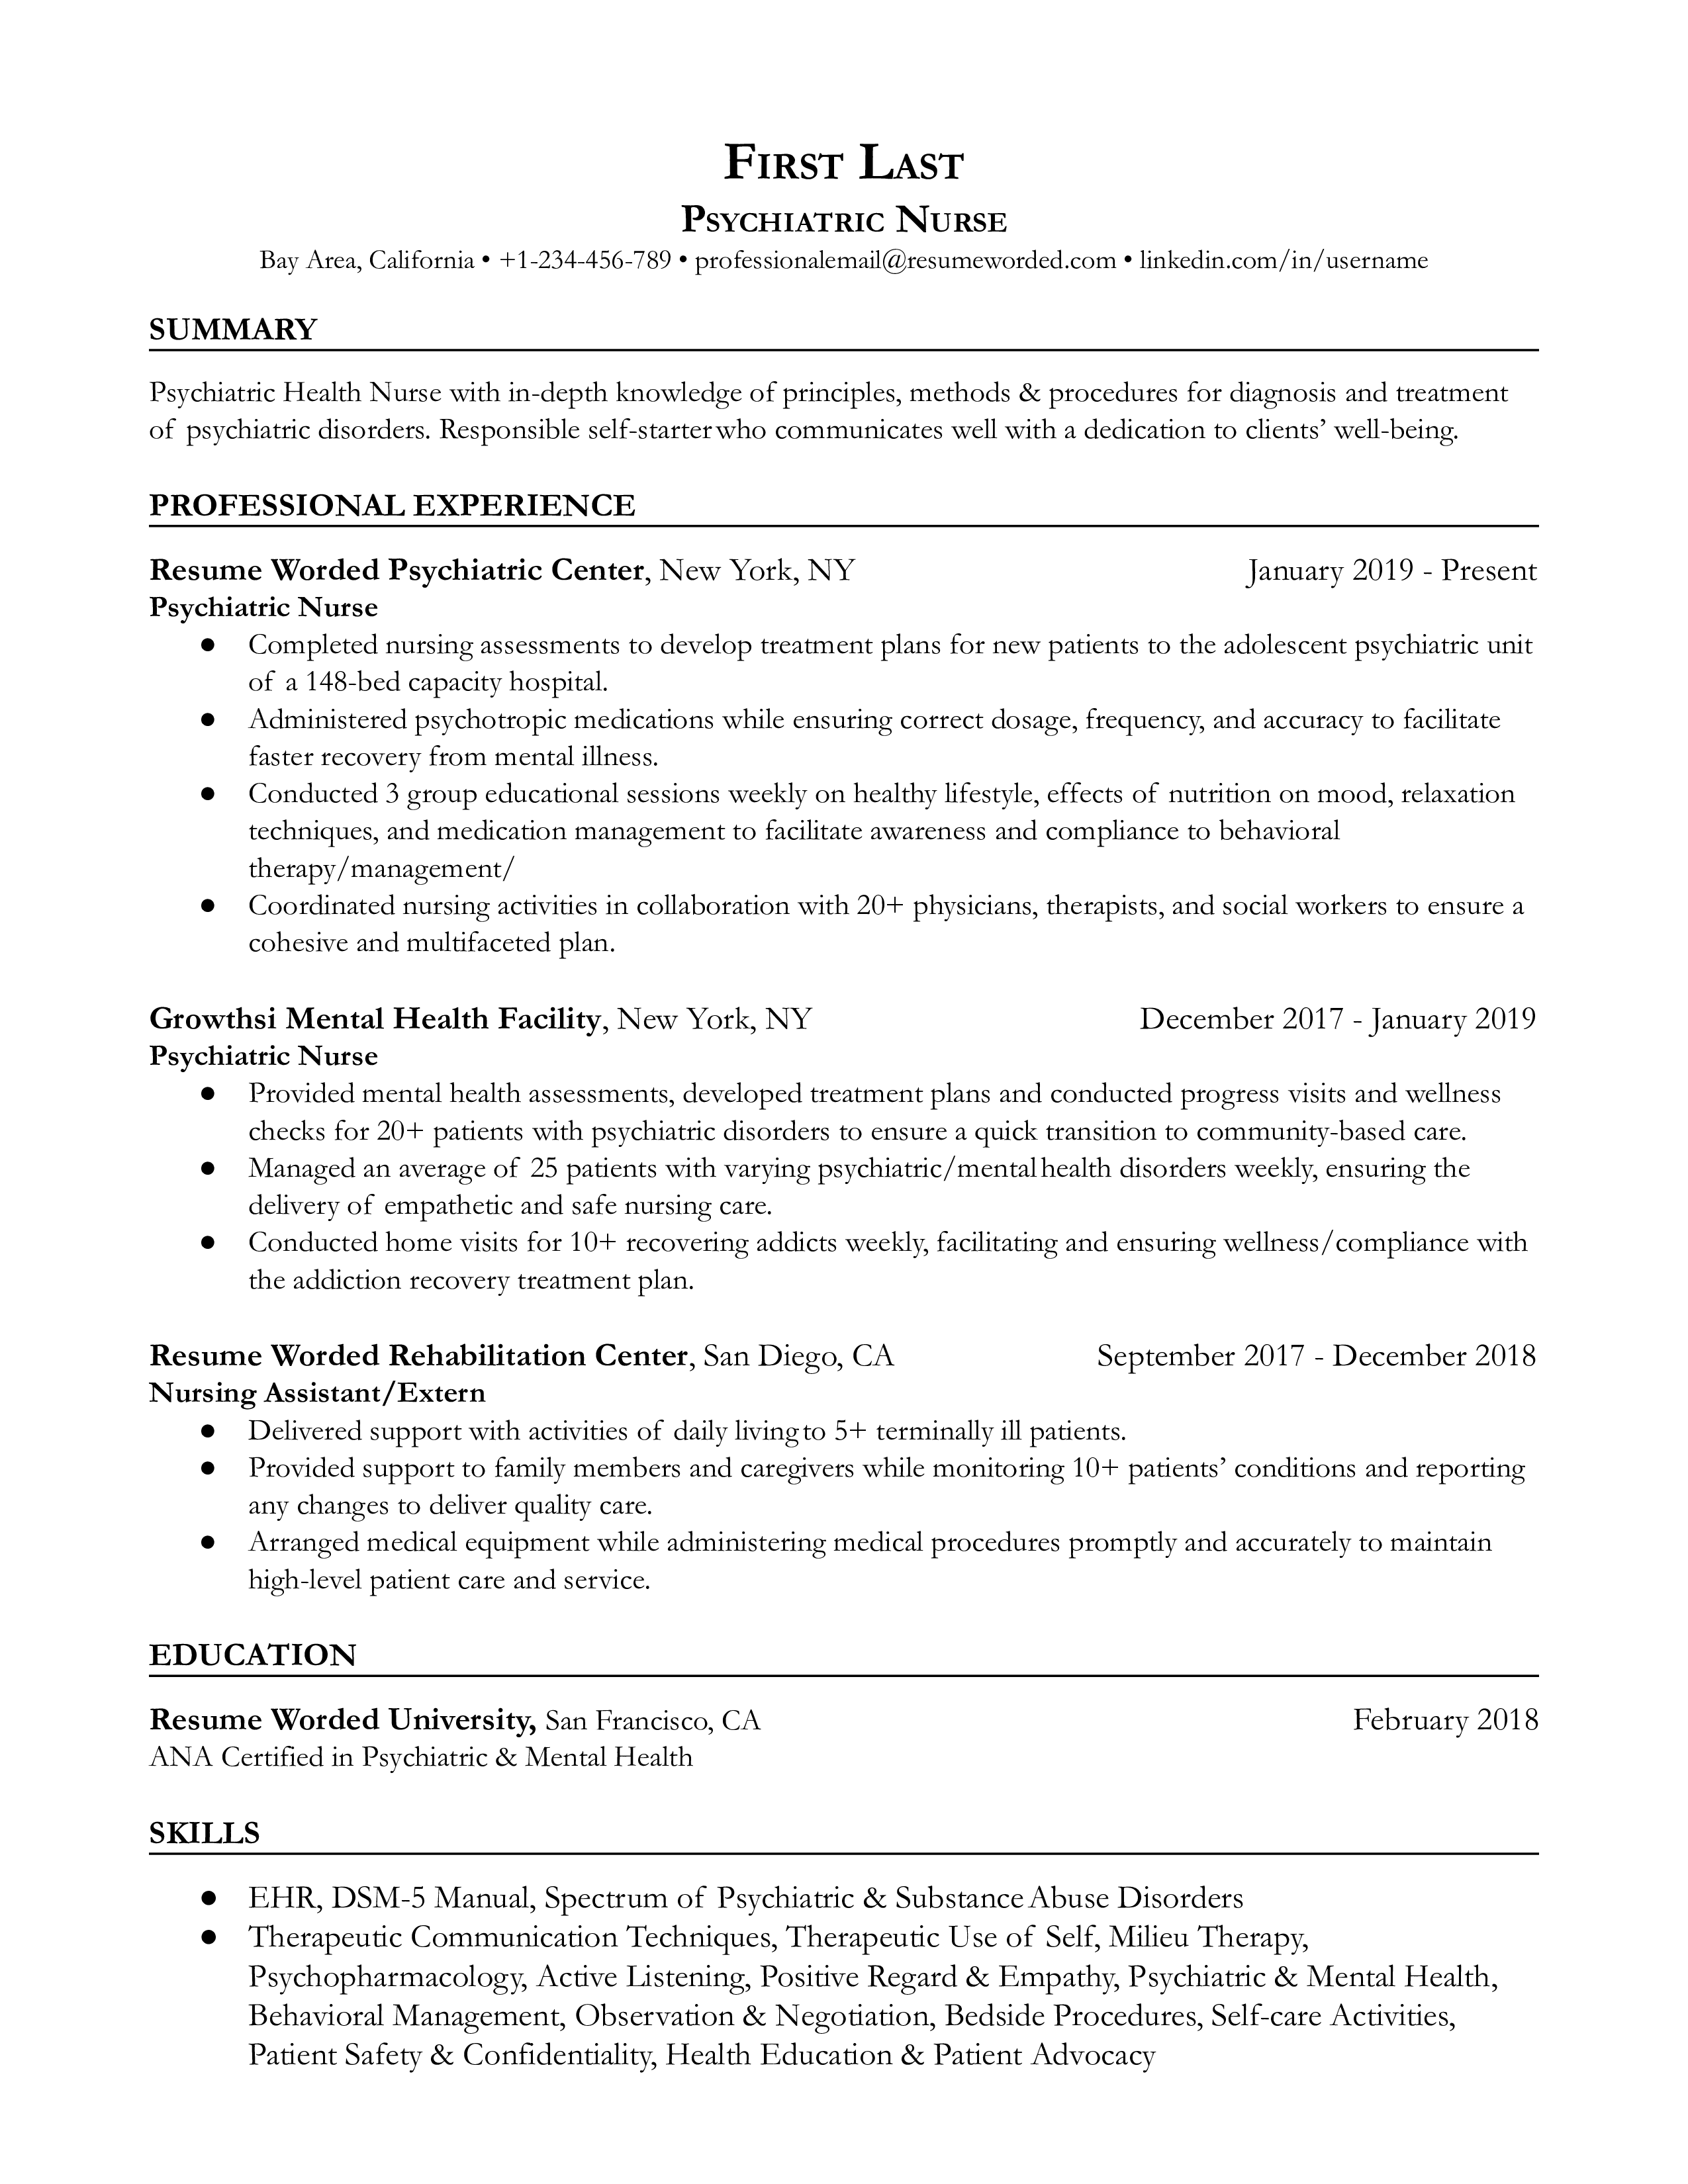 Psychiatric nurse resume template sample with a resume summary that uses bullet points to highlight transferable skills